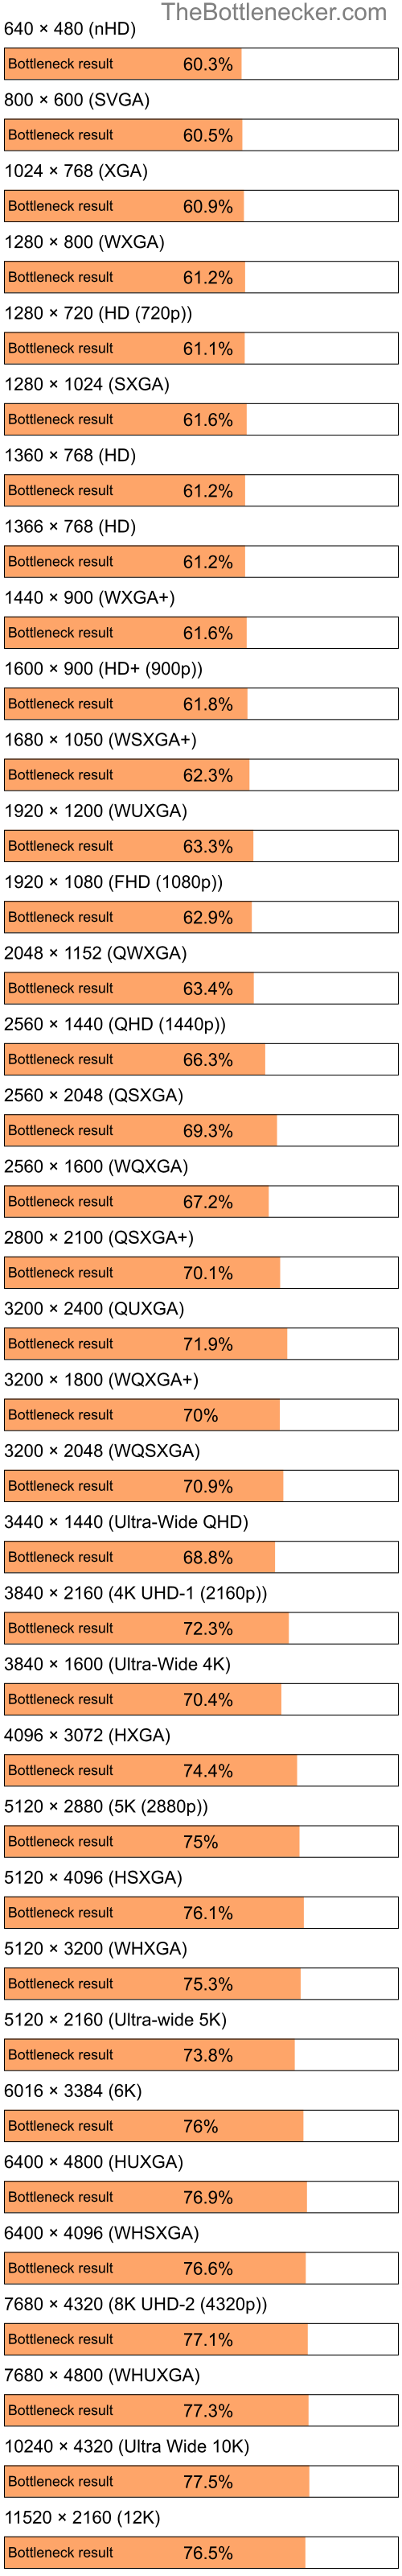 Bottleneck results by resolution for Intel Pentium 4 and Intel G45 in General Tasks